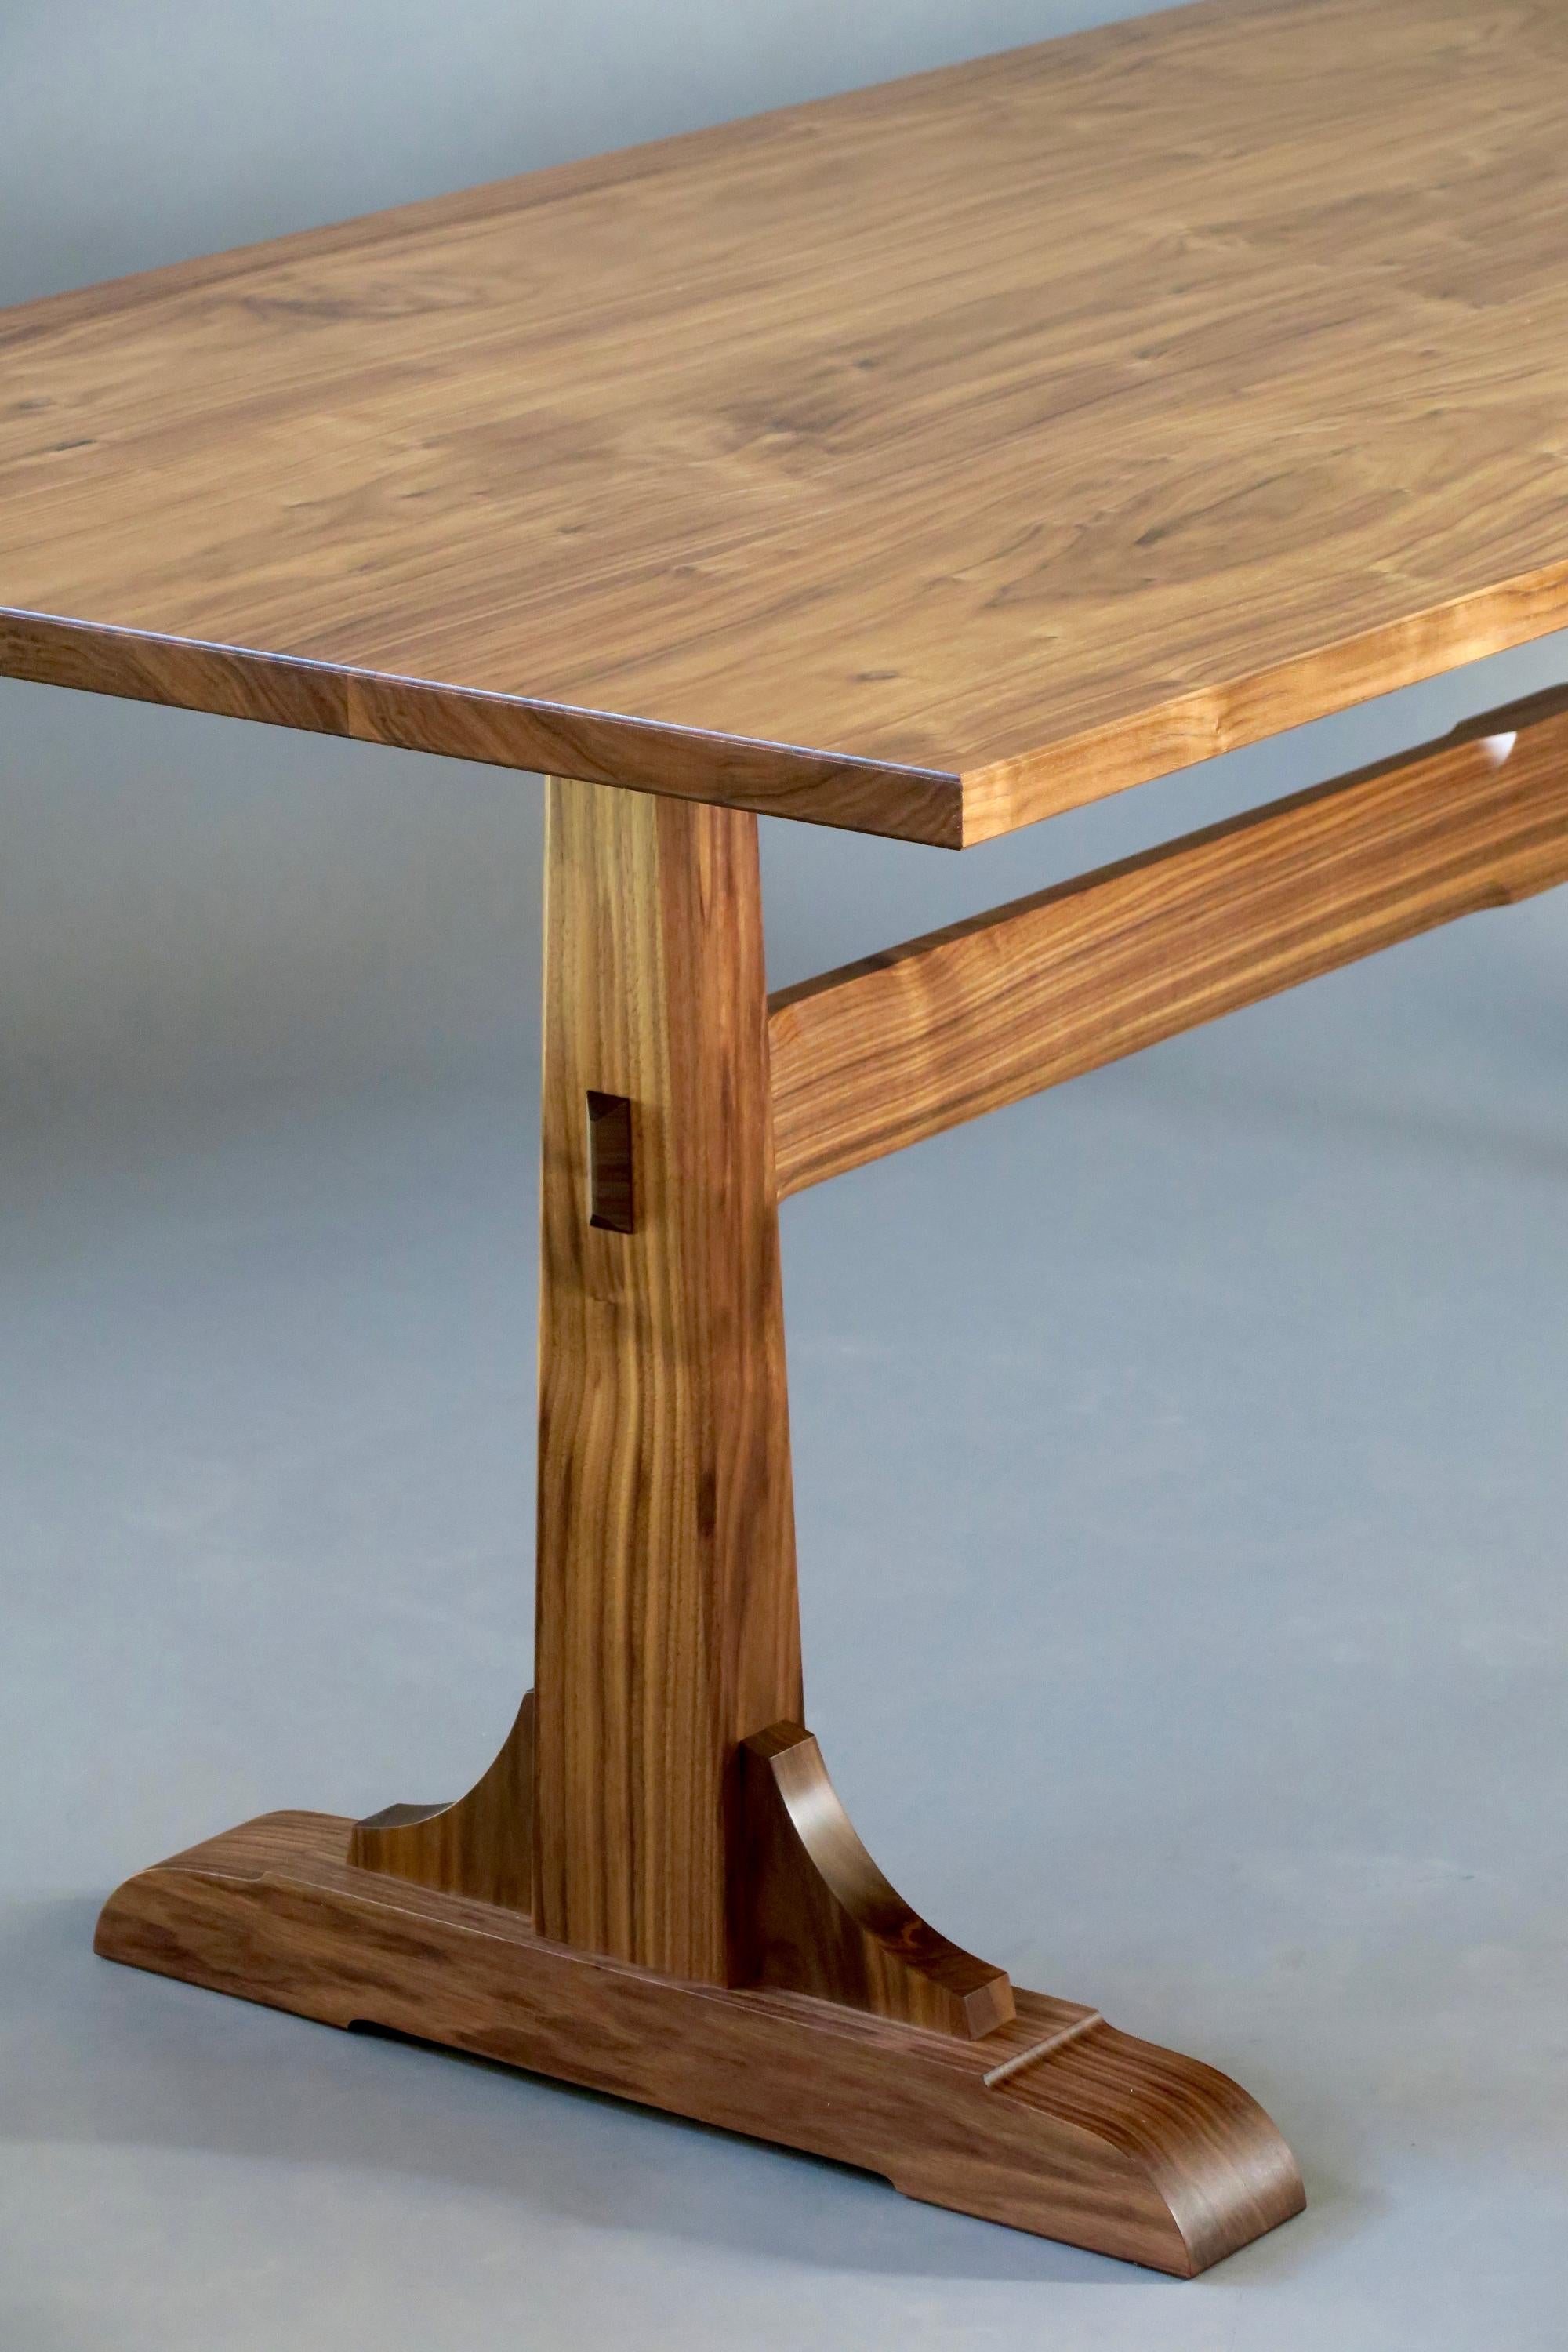 American Craftsman Walnut Trestle Dining Table by Thomas Throop/Black Creek Designs - In Stock For Sale